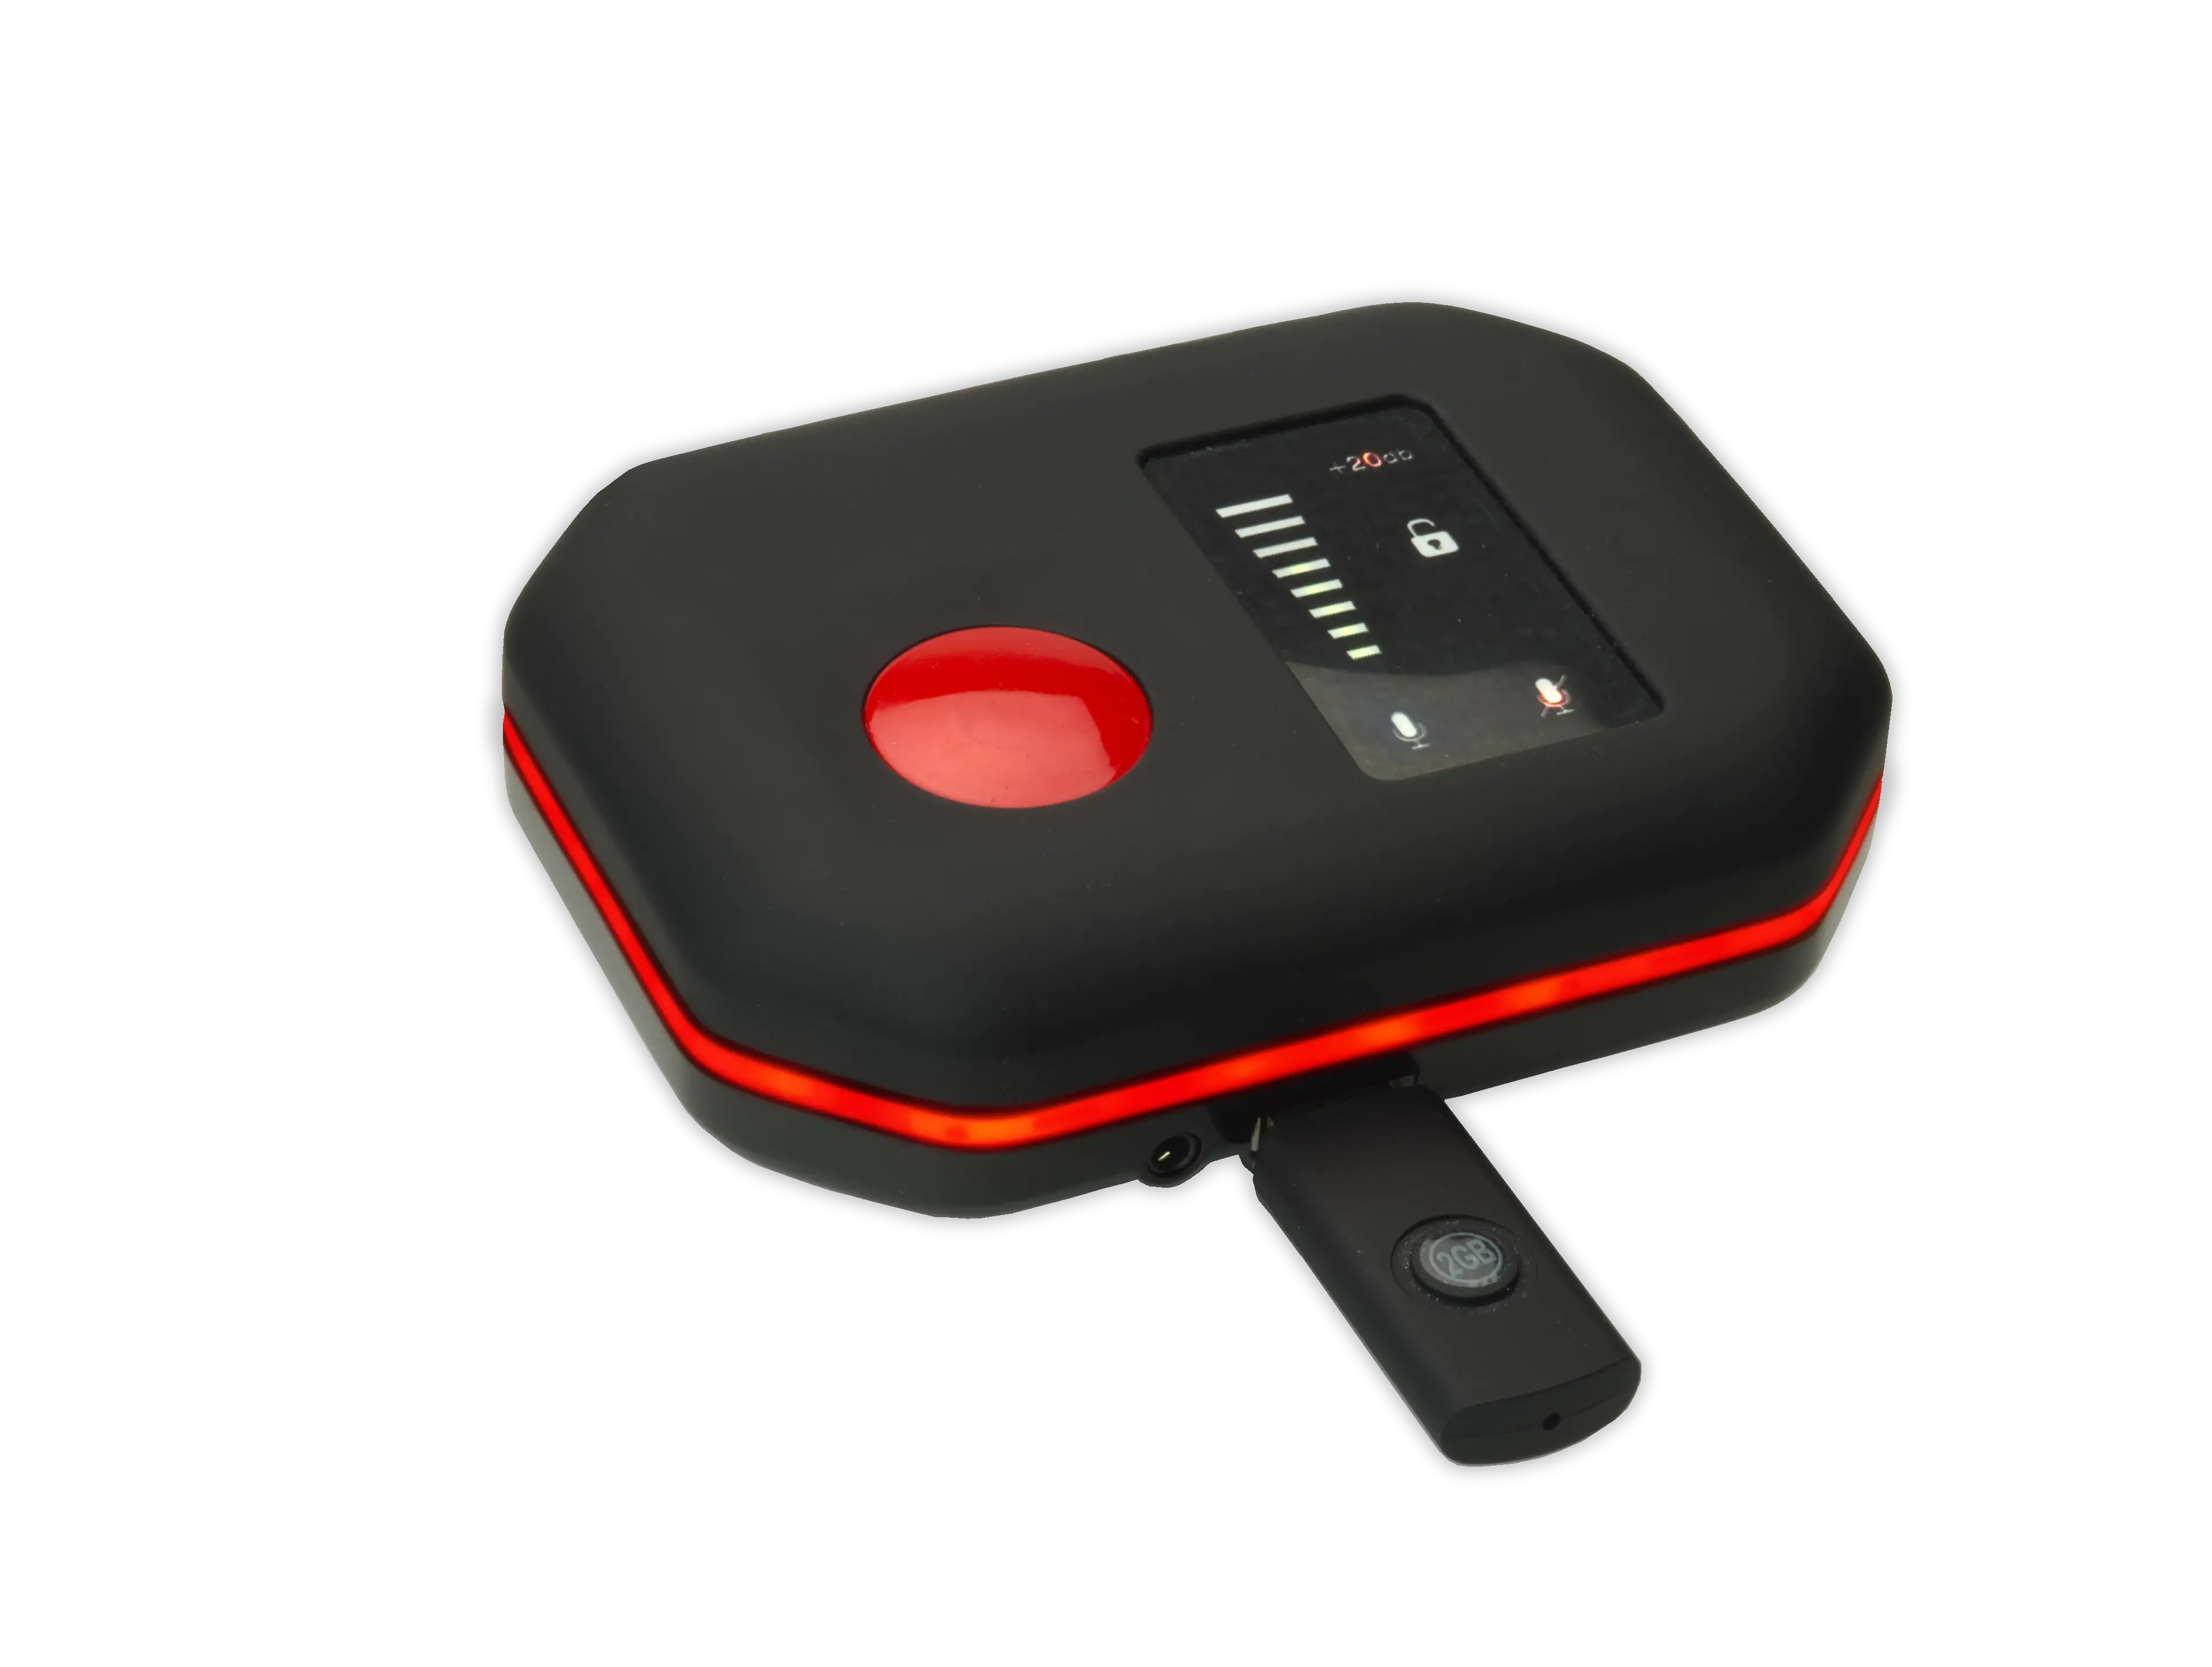 Hauppauge Launches HD PVR Rocket, a Portable Video game Recorder for Xbox, PlayStation and PC Game Systems